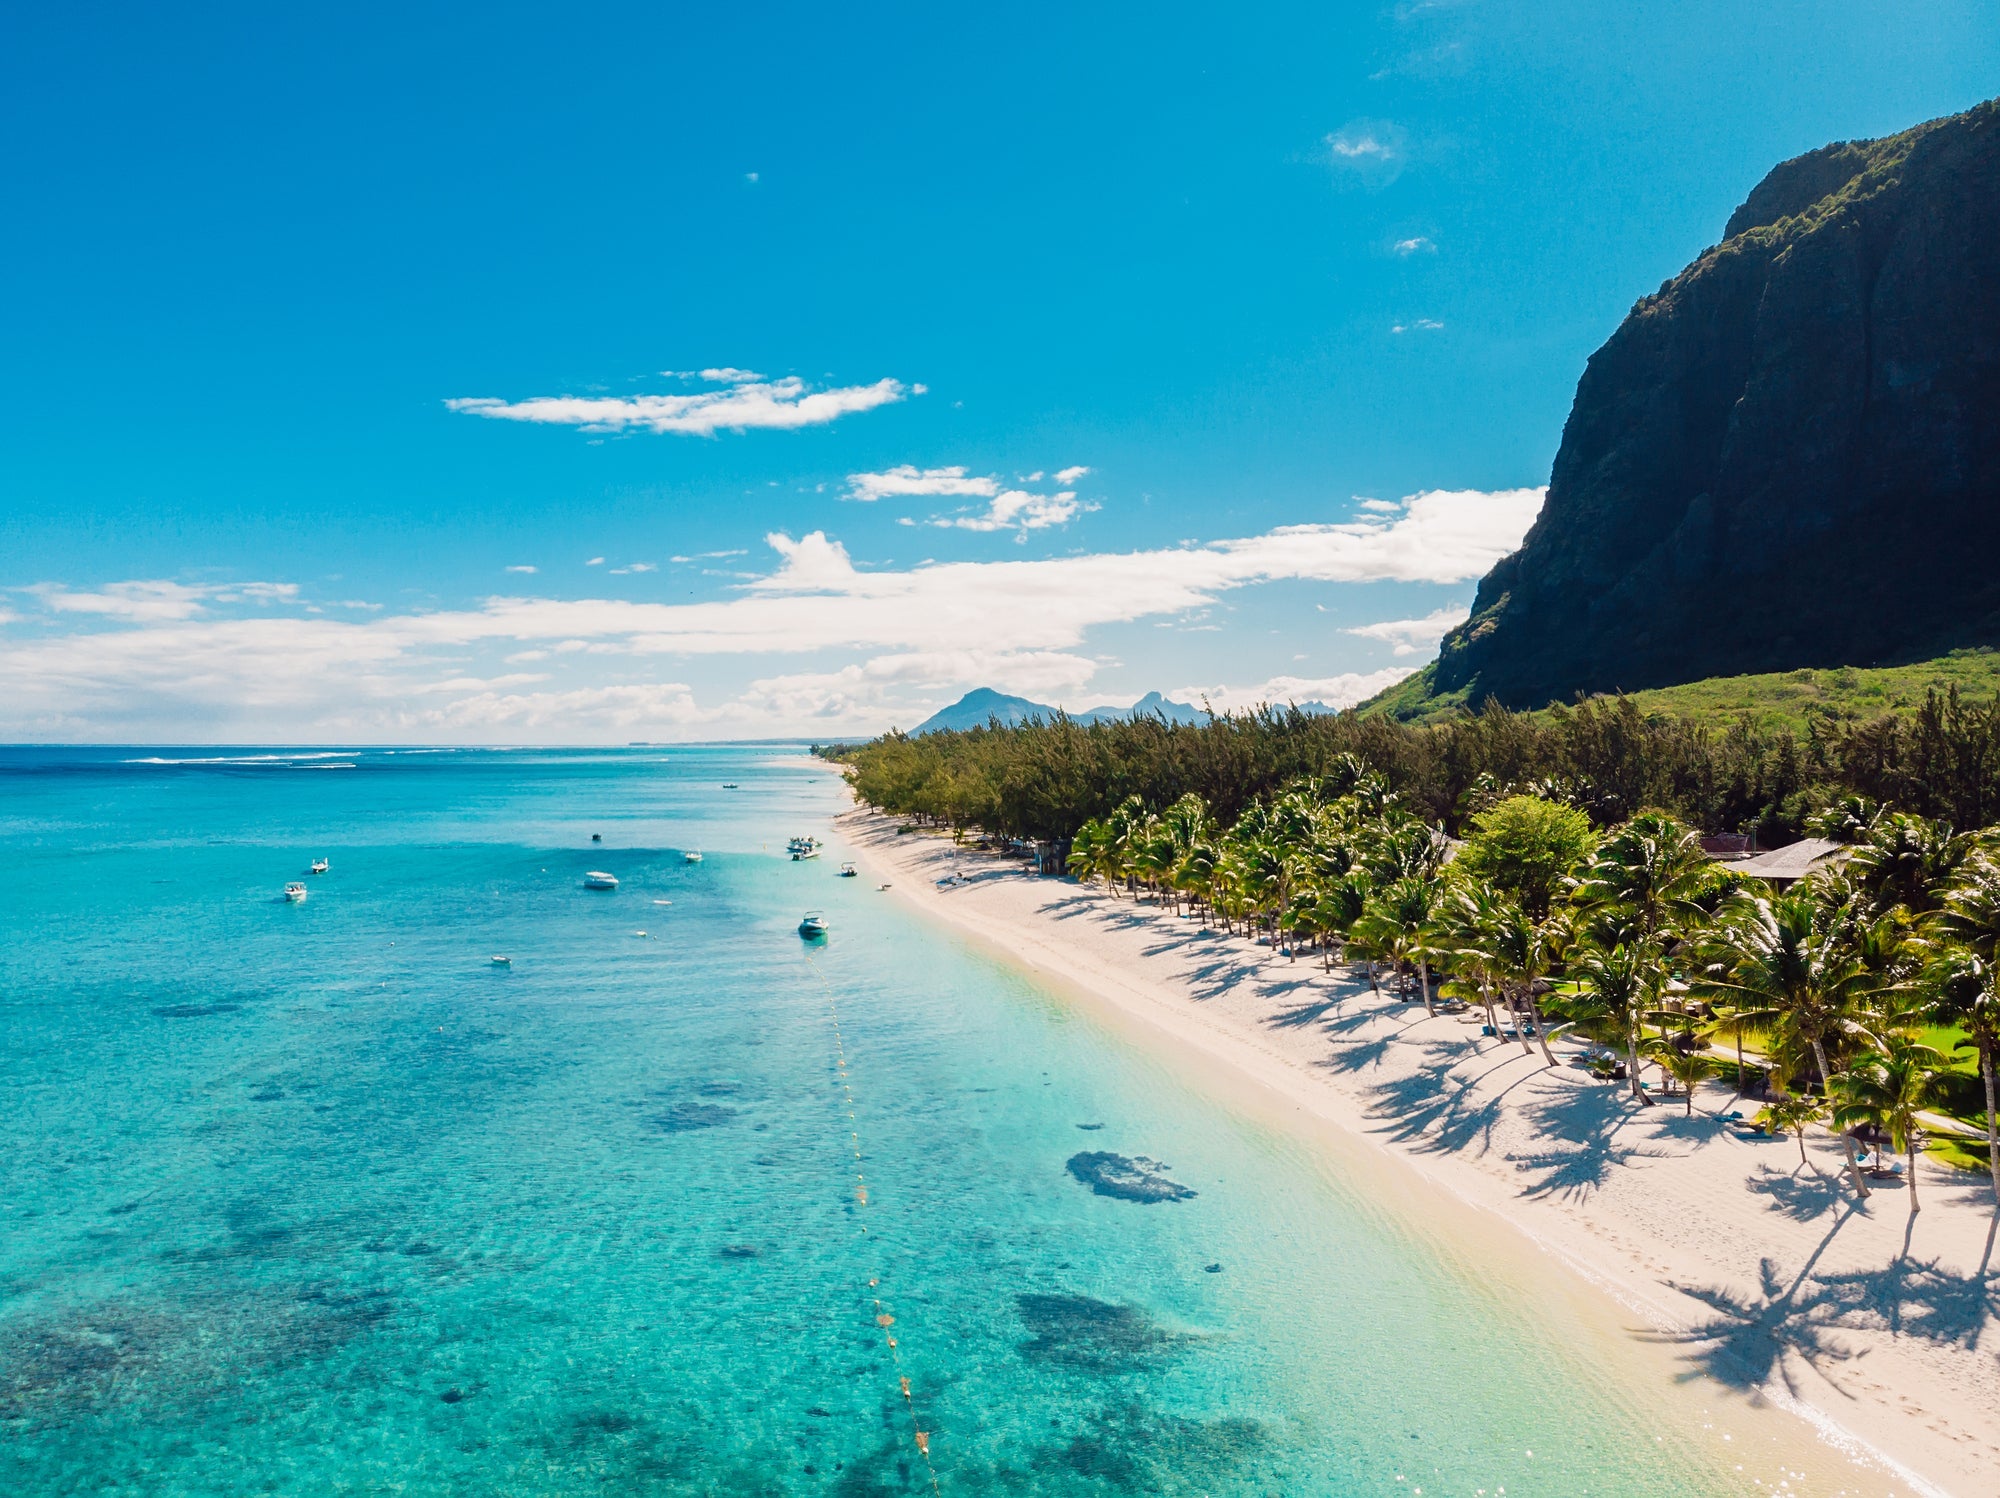 Luxury beach with mountain in Mauritius. Sandy beach with palms and blue ocean. Aerial view (Photo by Nuture/Getty Images)